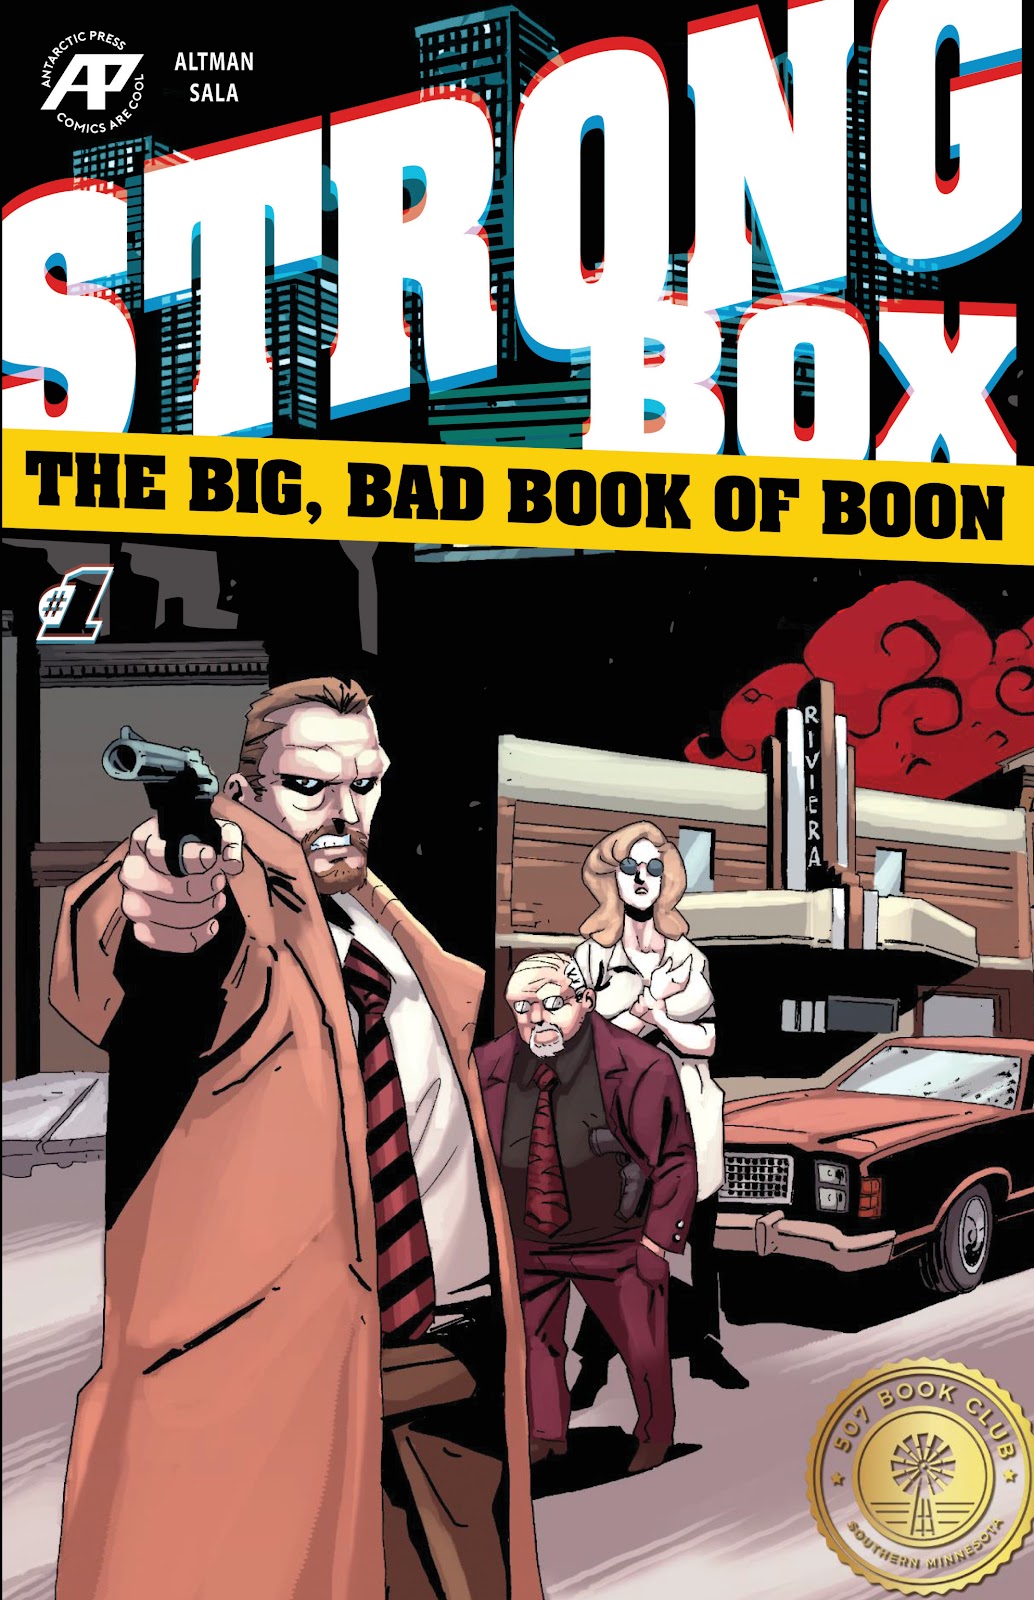 Strong Box: The Big Bad Book of Boon issue 1 - Page 1